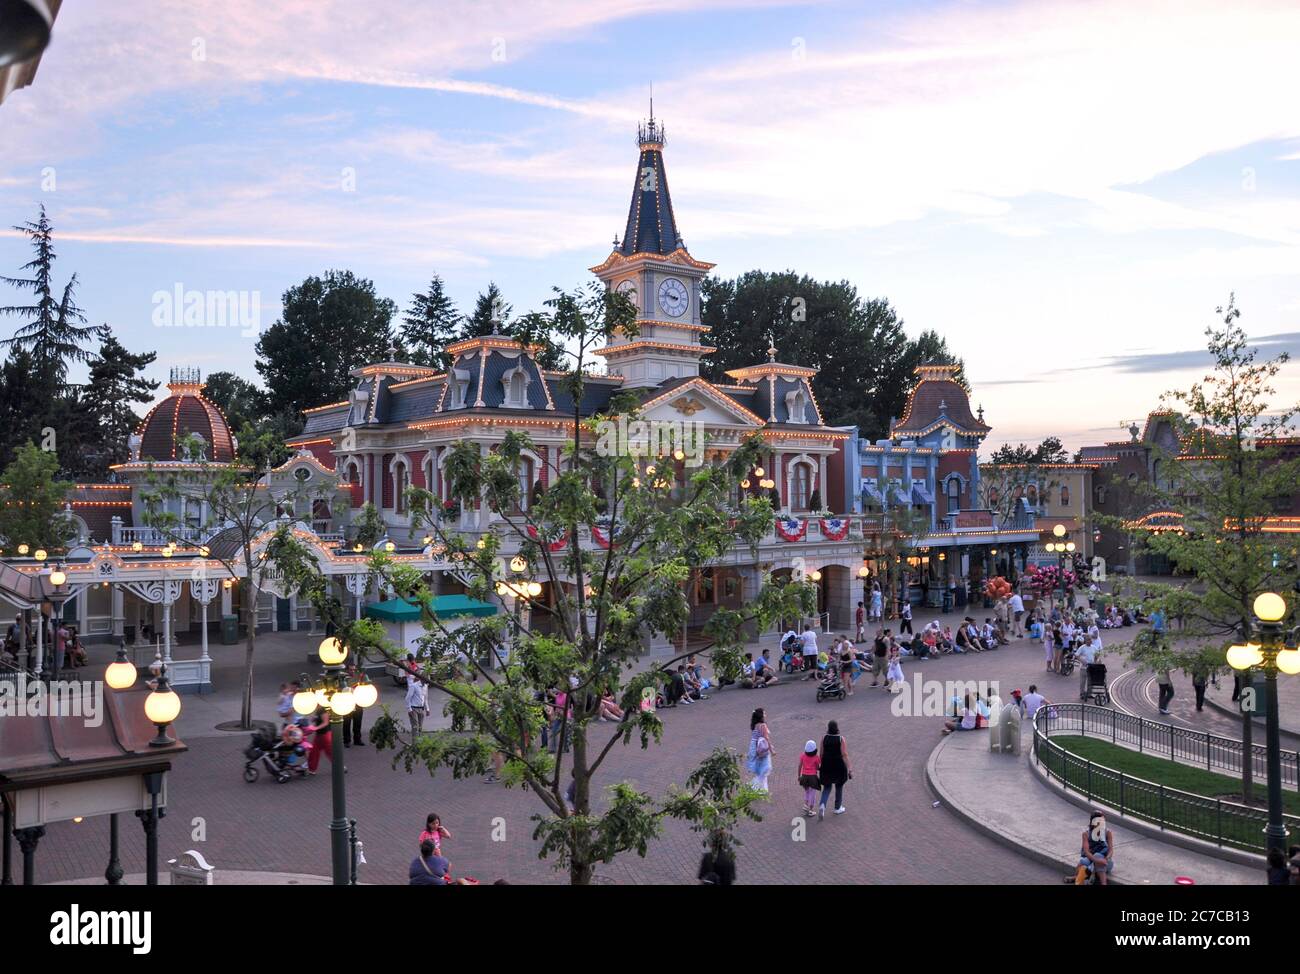 PARIS, FRANCE, July 19, 2010: Square with people in front of the main entrance to the Disneyland Paris. Disneyland Park, one of the attractions of Par Stock Photo